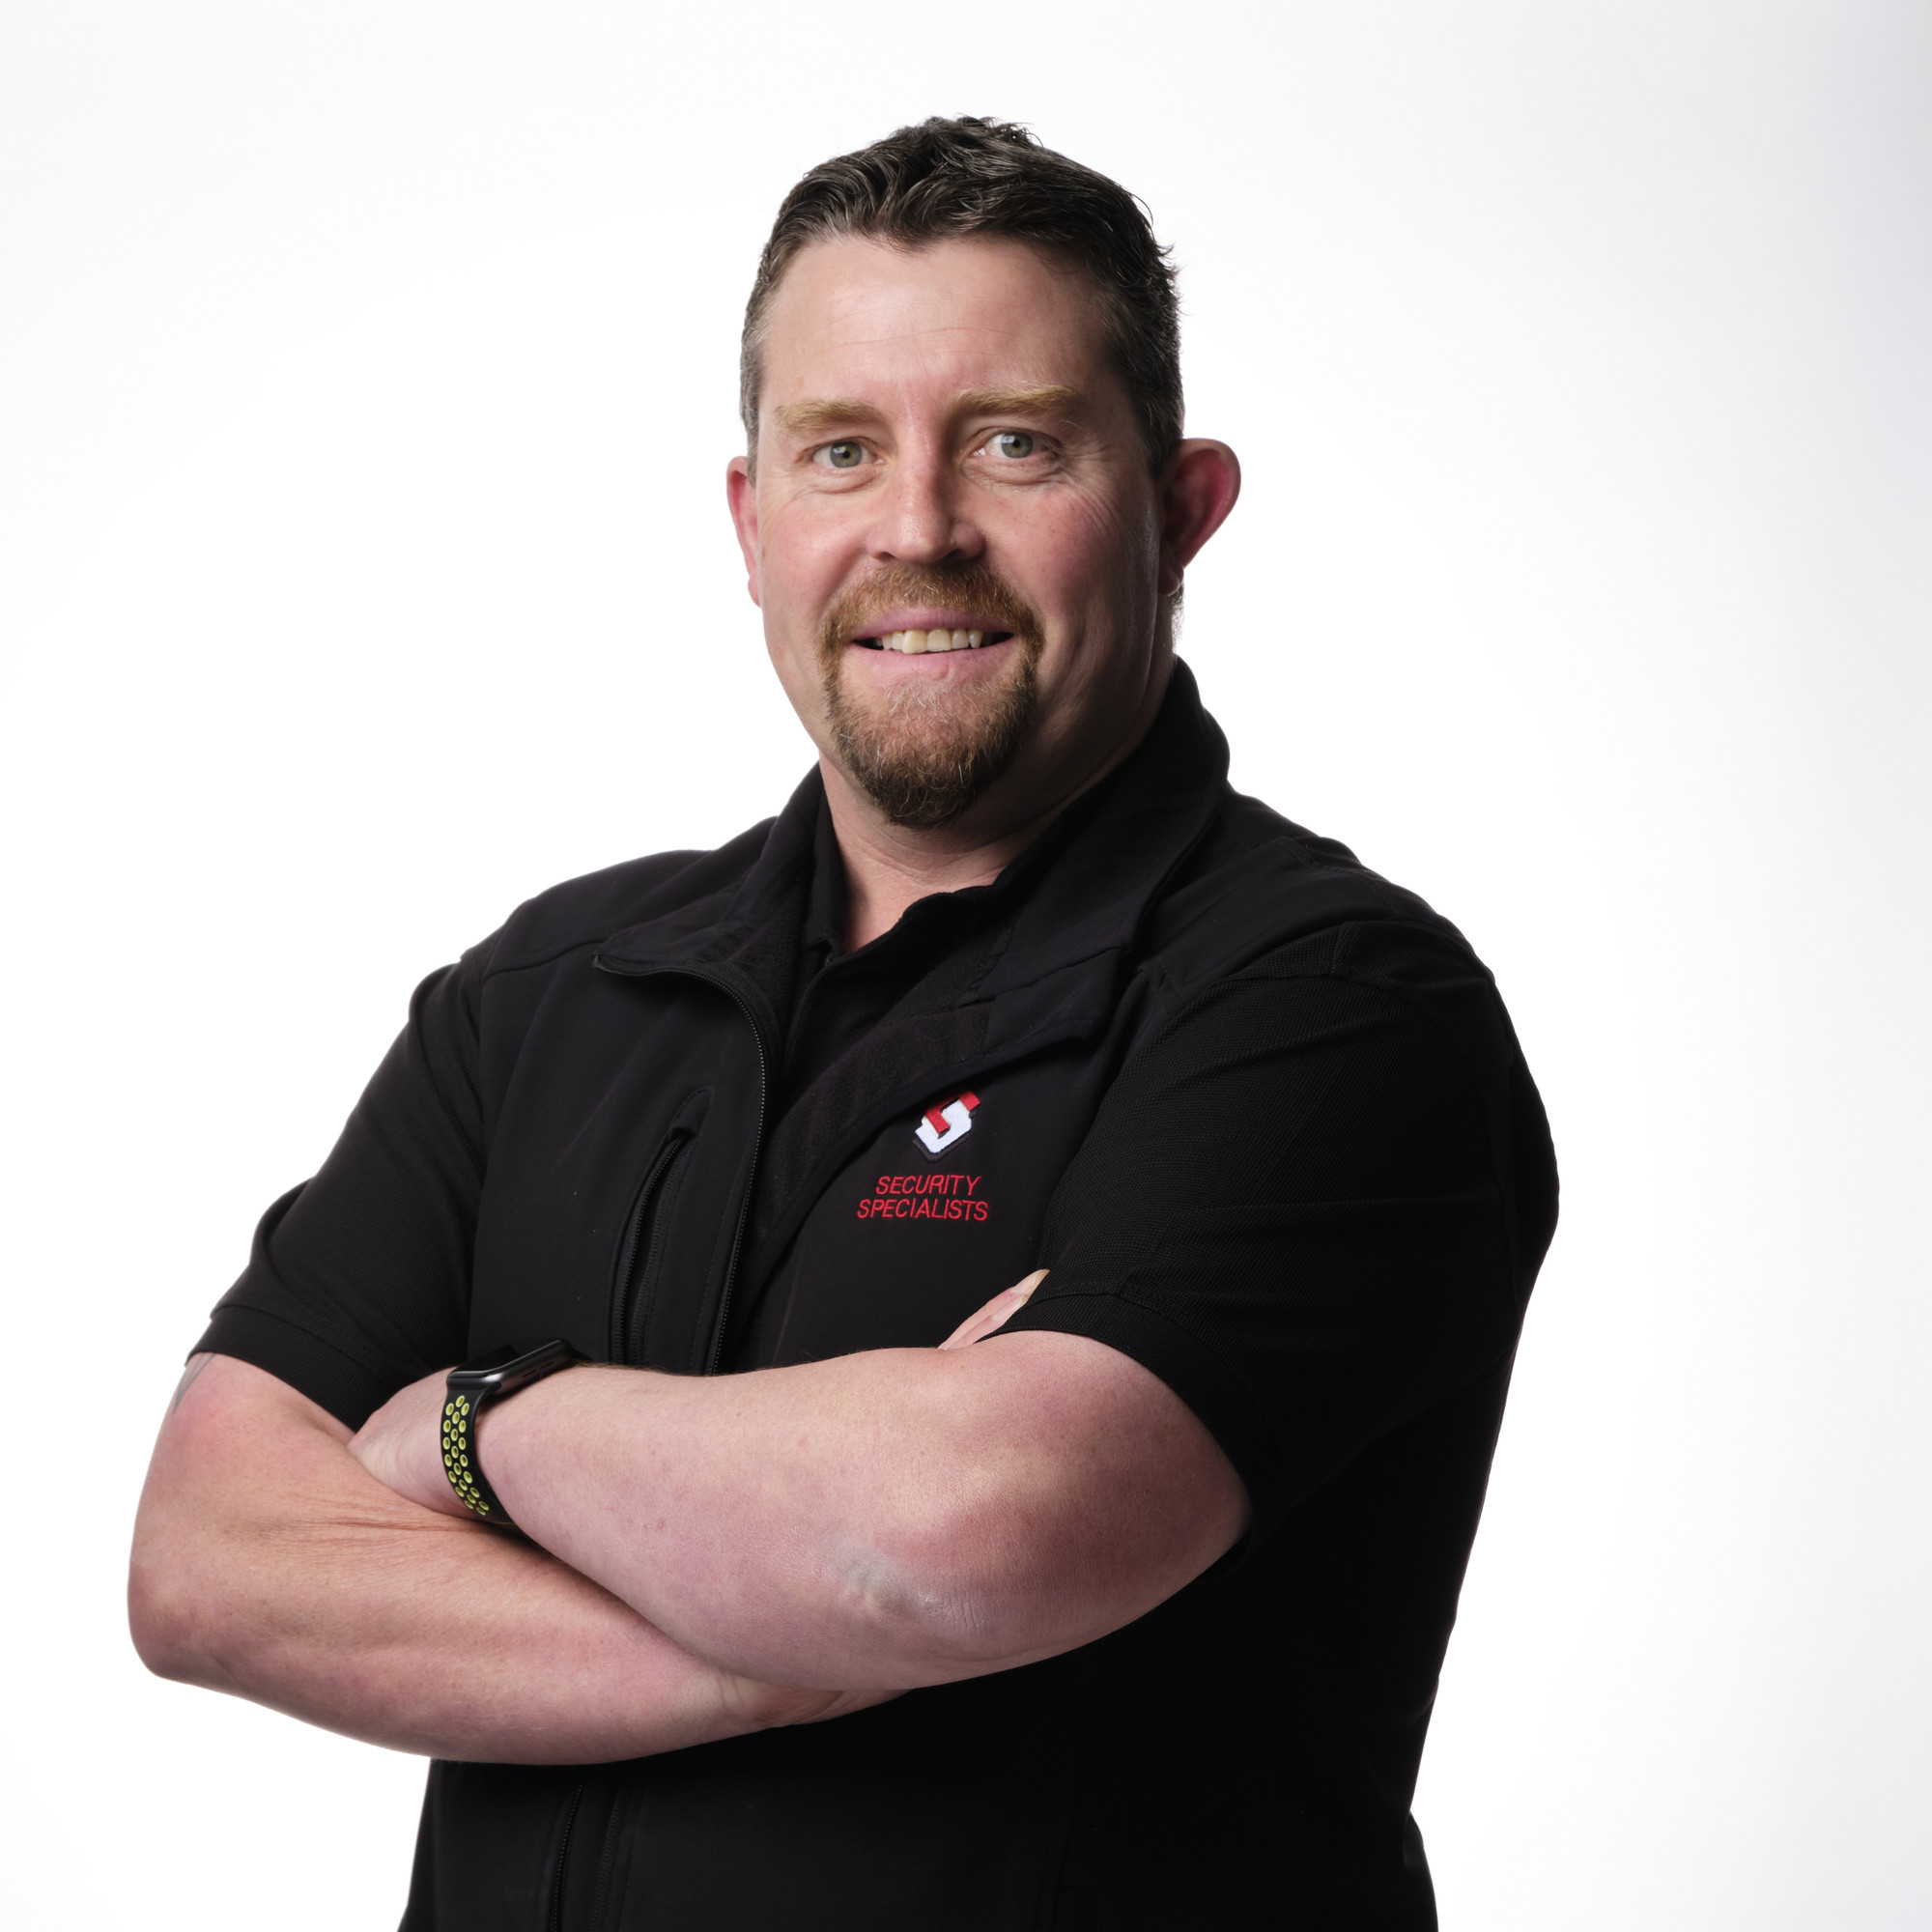 Paul Rowley - Dunedin Manager, Security Specialists